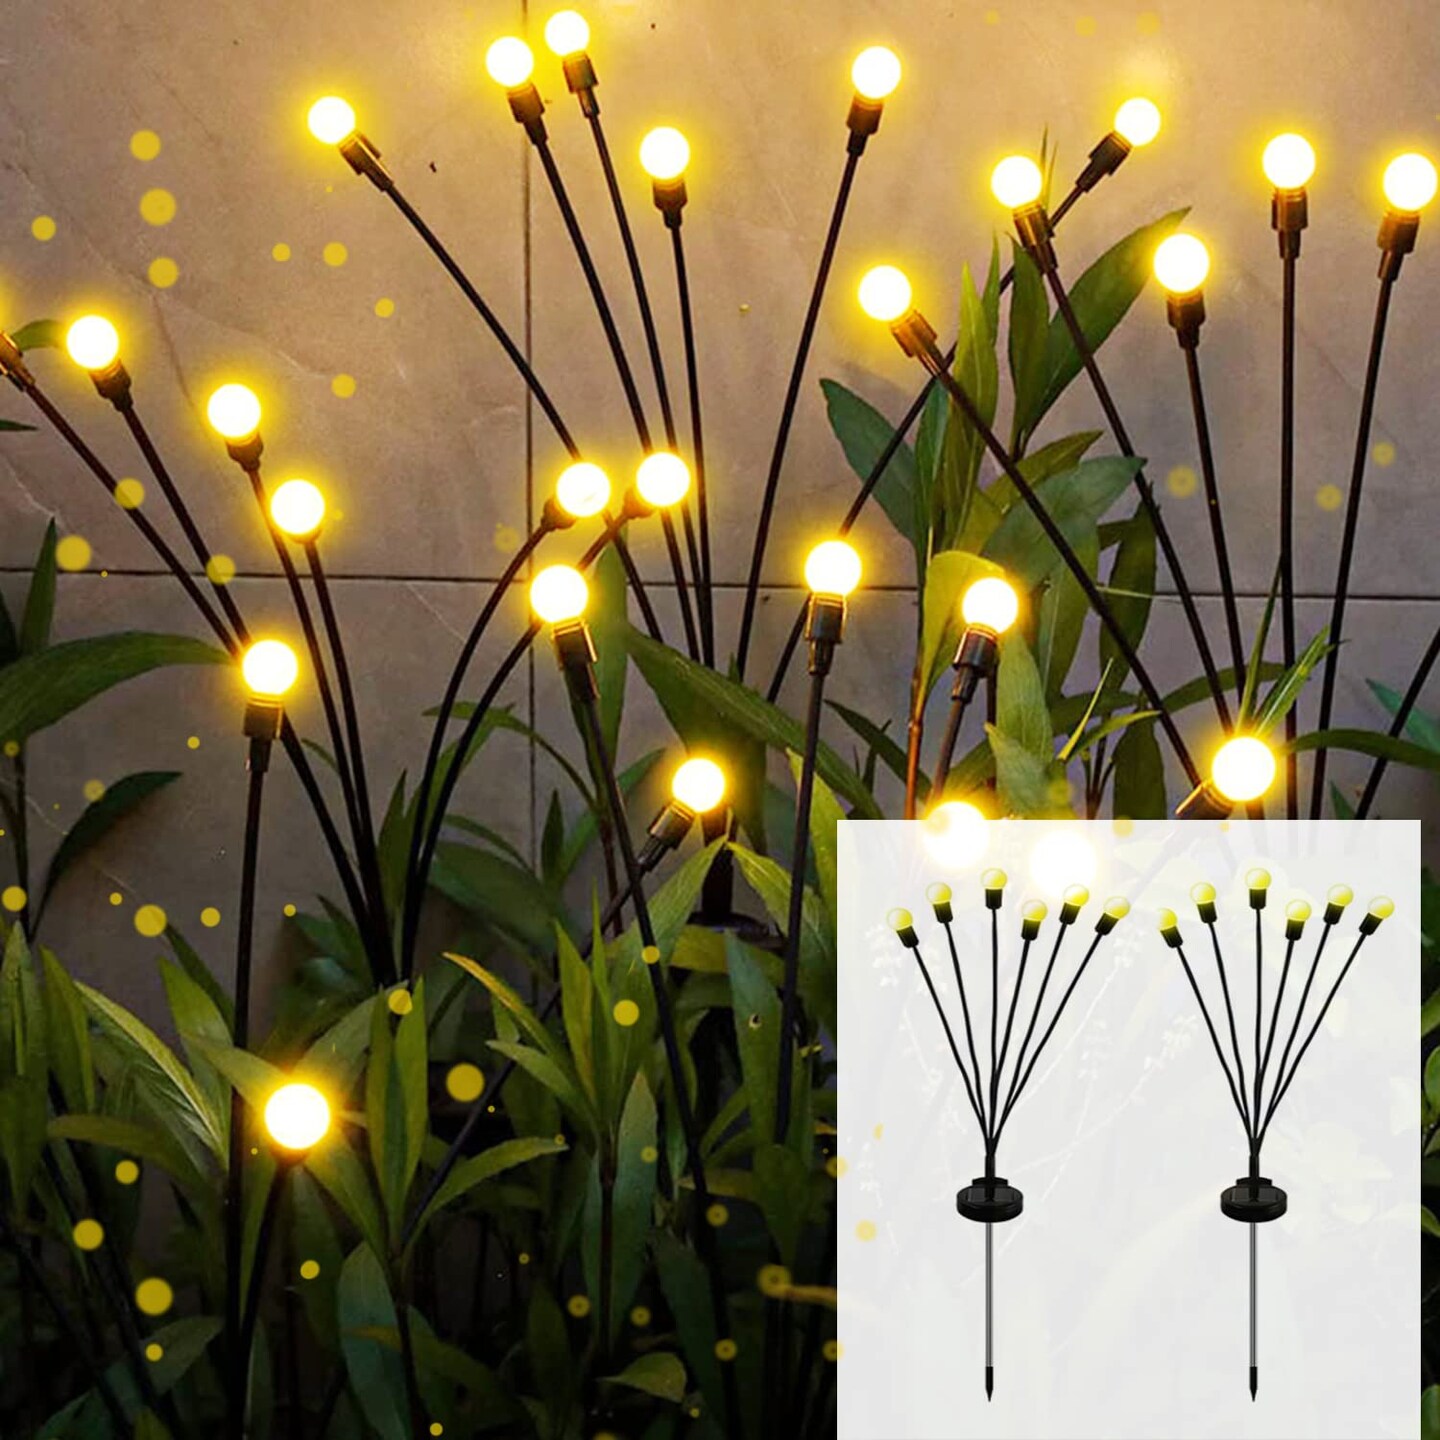 2 Pack Solar Garden Lights, Outdoor Solar Lights for Outside, Firefly Lights Outdoor Waterproof for Landscape, Pathway, Yard, Patio D&#xE9;cor, Solar Starburst Swaying Lights When Wind Blows(Warm White)